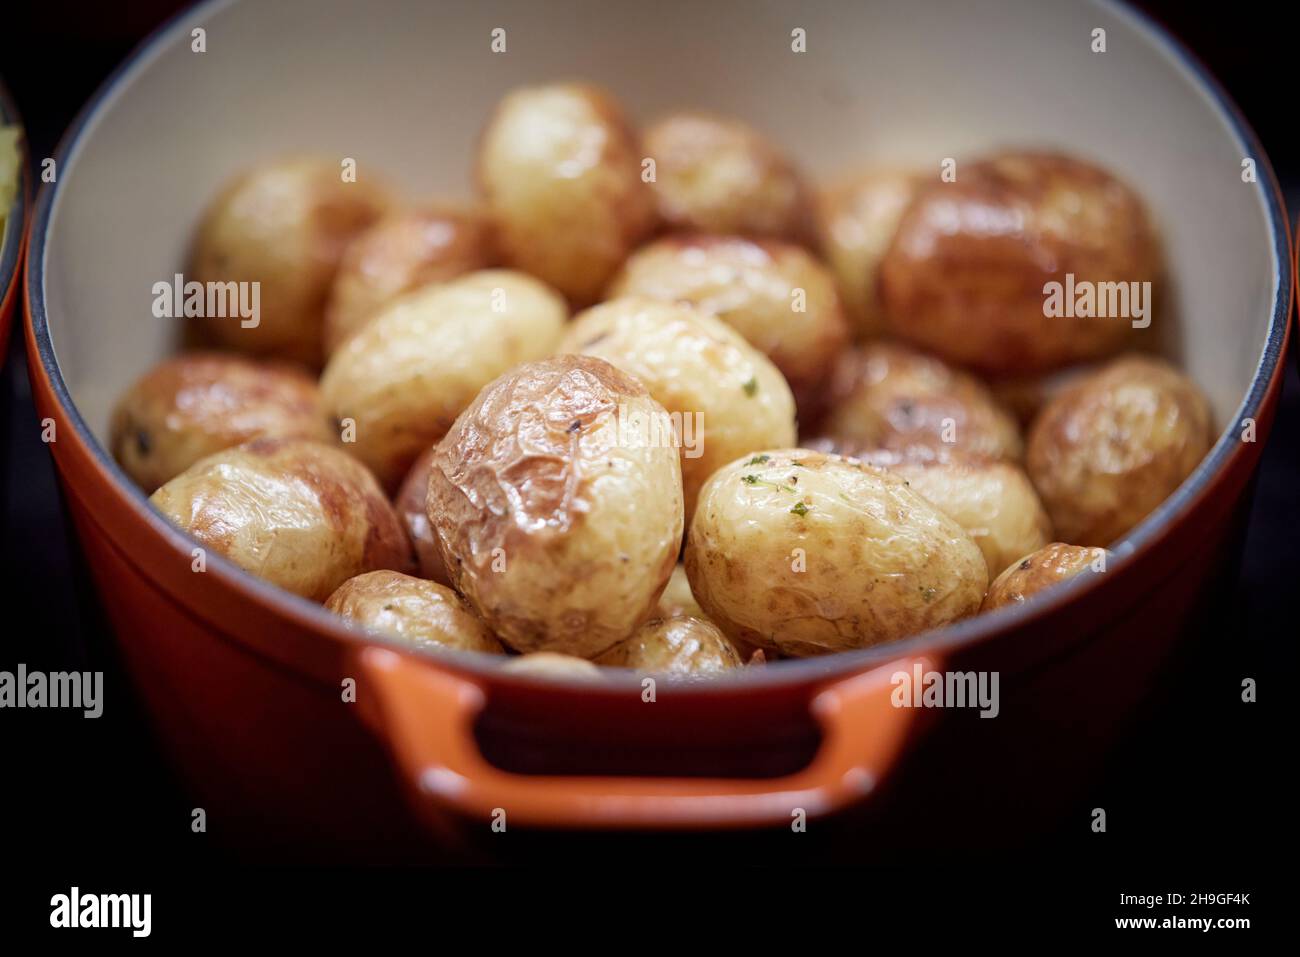 Pub carvery self service cooking pot of roasted potatoes Stock Photo